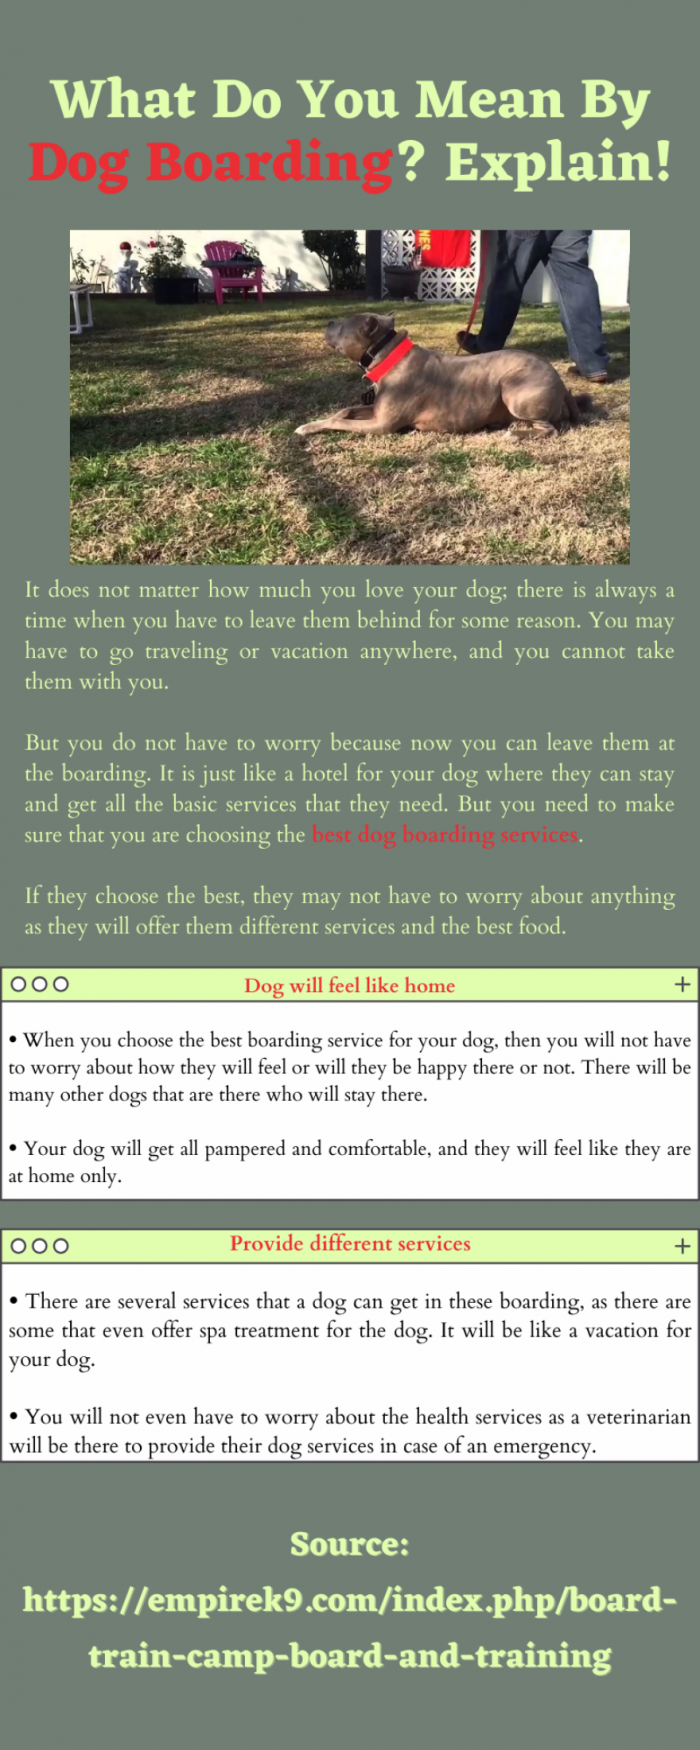 Dog Boarding-Provide different services